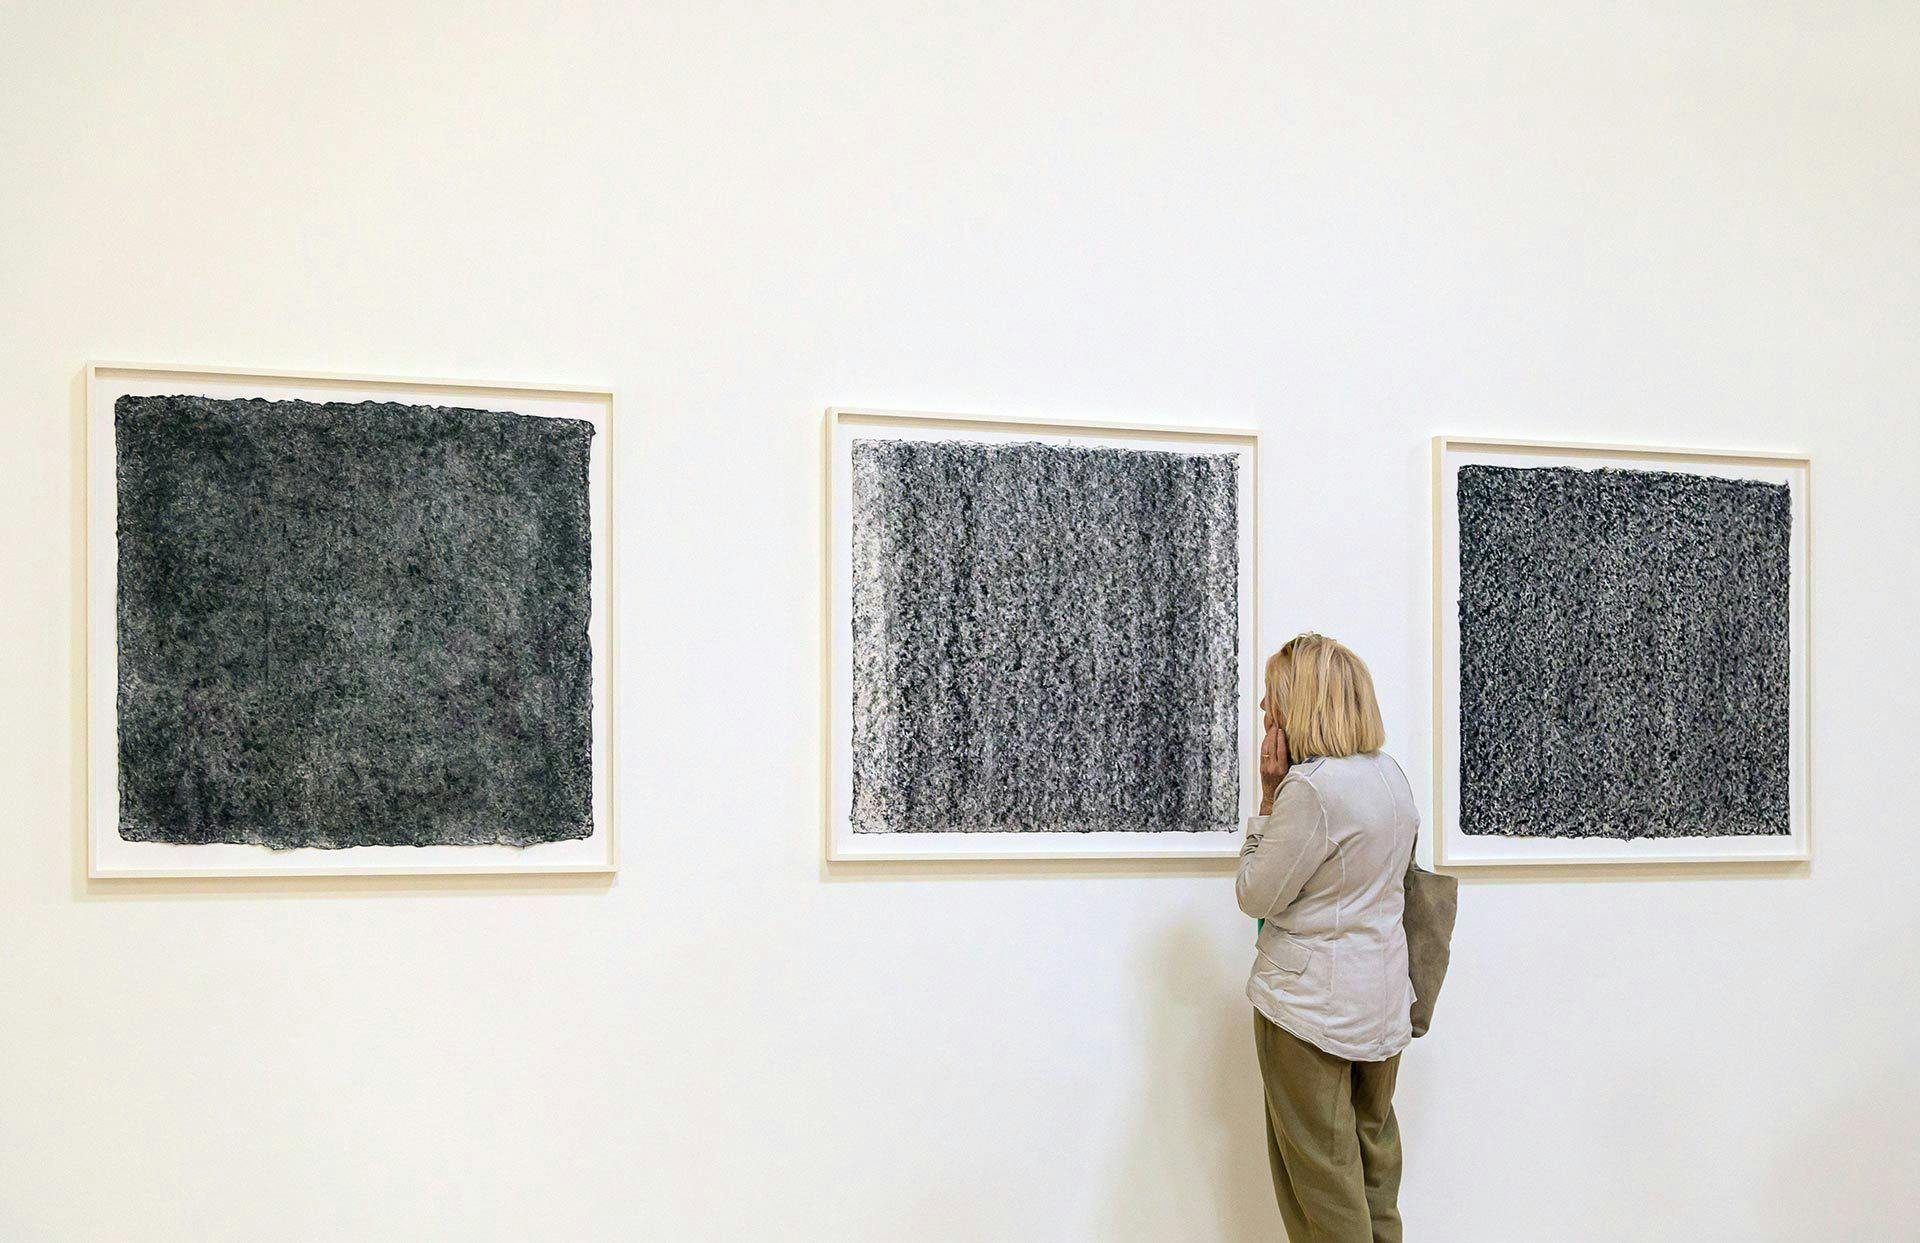 Installation view of the exhibition Serra/Seurat. Drawings at the Guggenheim Museum Bilbao, dated 2022.